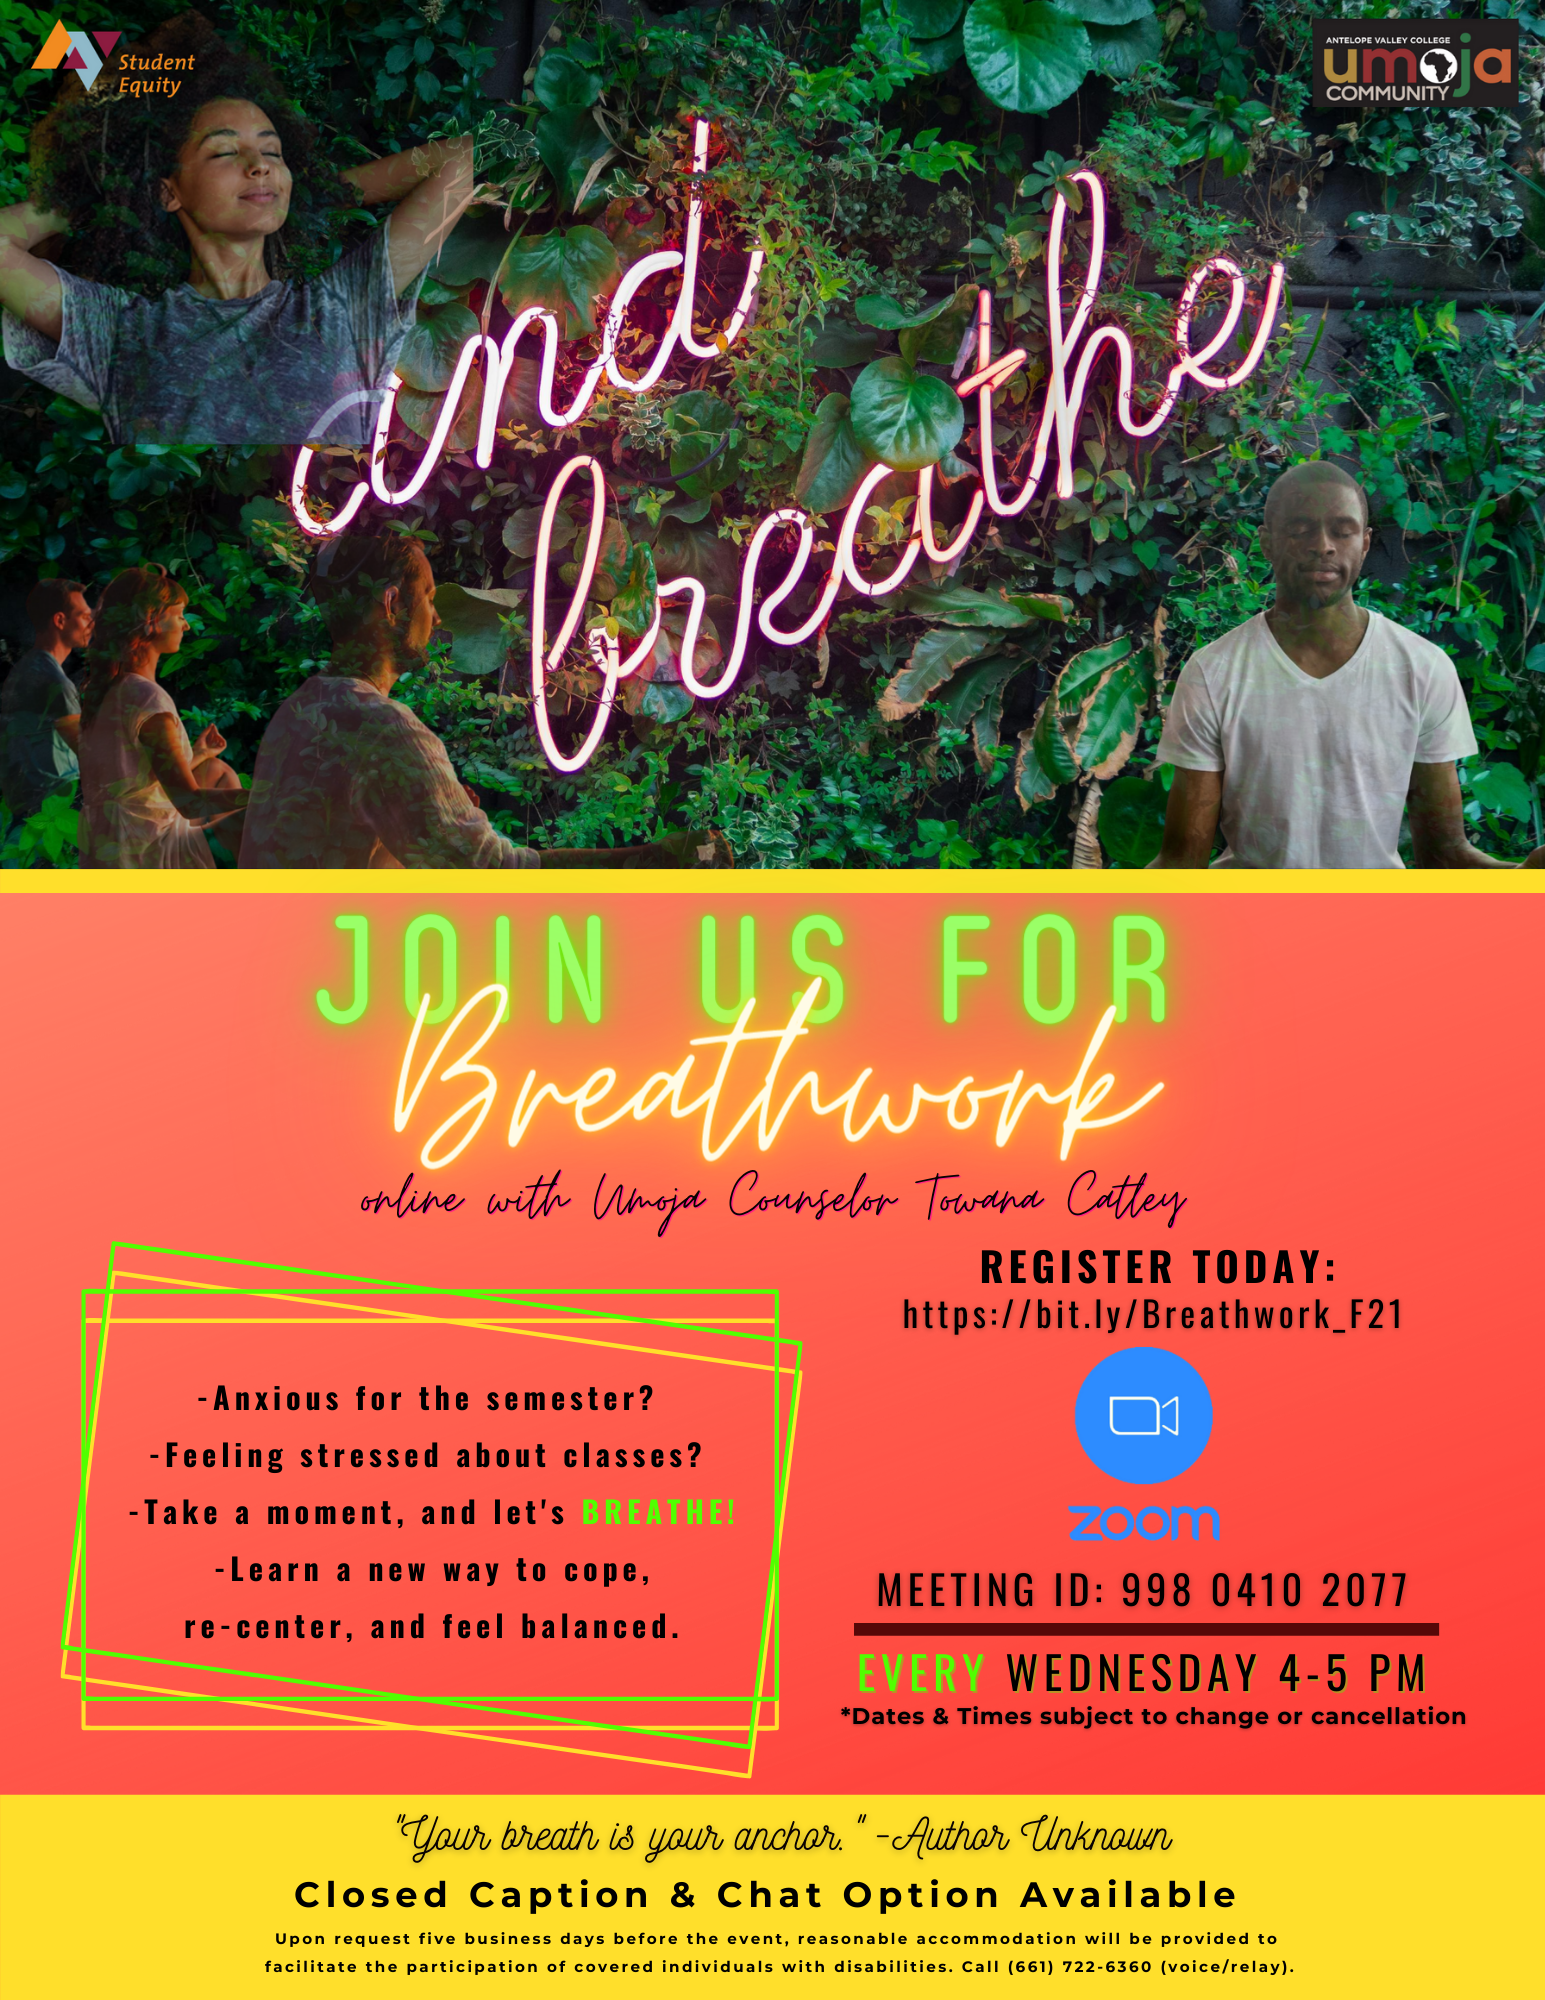 Breathwork Flyer: and breathe...Join us for Breathwork online with Umoja Counselor Towana Catley.